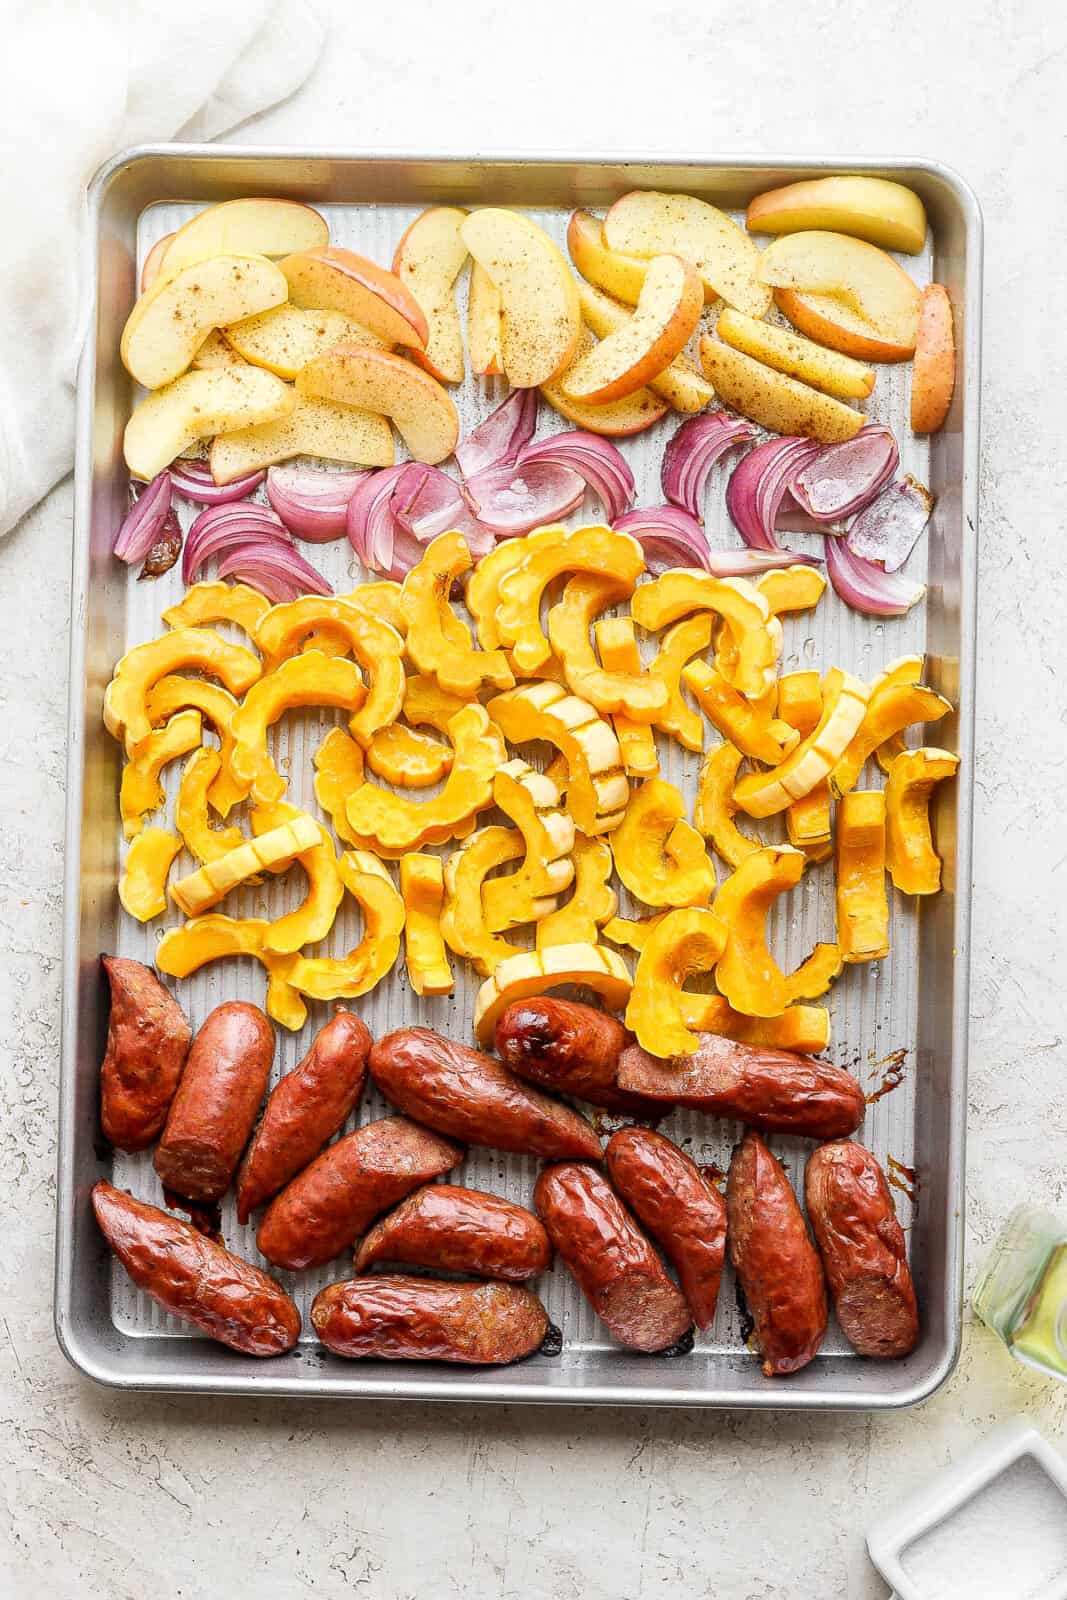 The sheet pan with all ingredients on it.